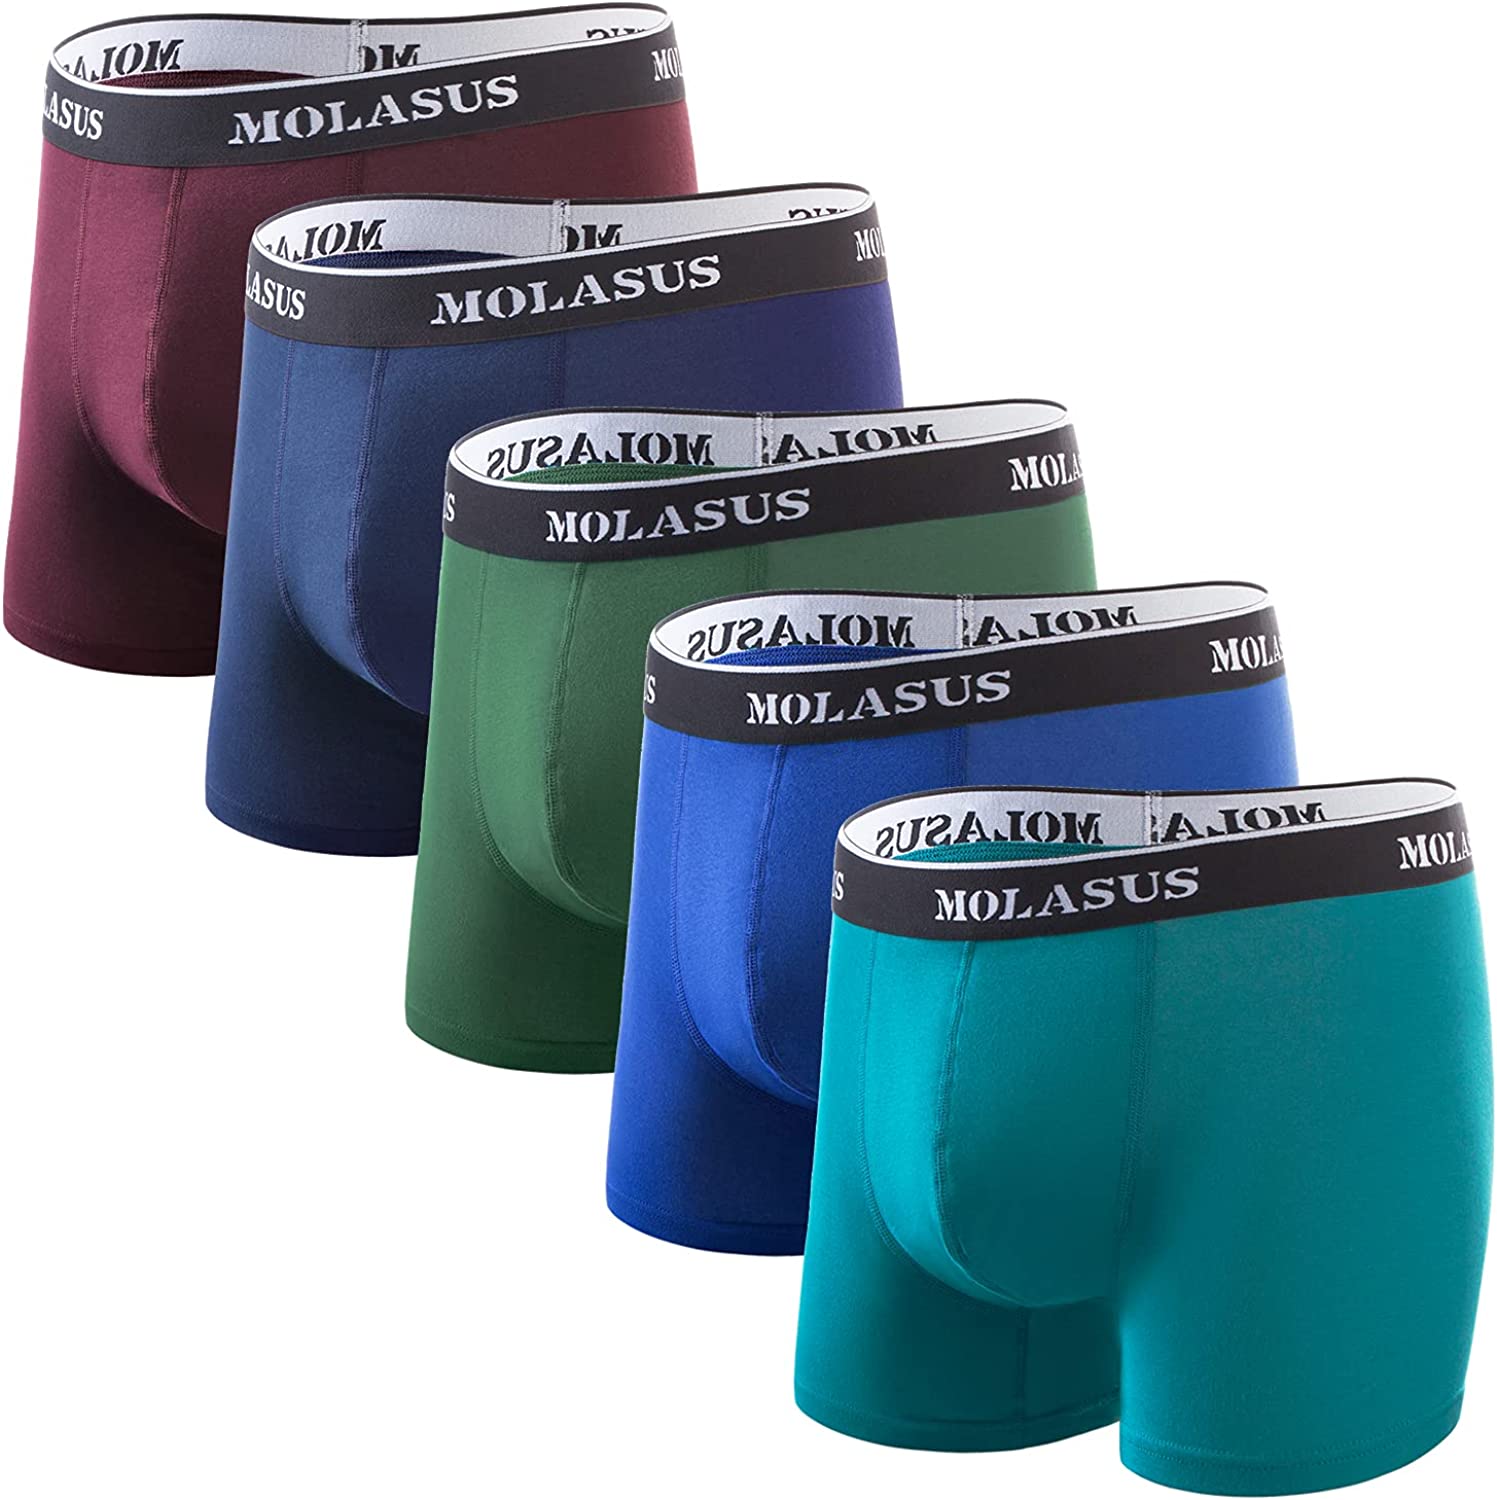 Molasus Mens Cotton Stretch Trunks Underwear No Fly Tagless Underpants Pack  of 5